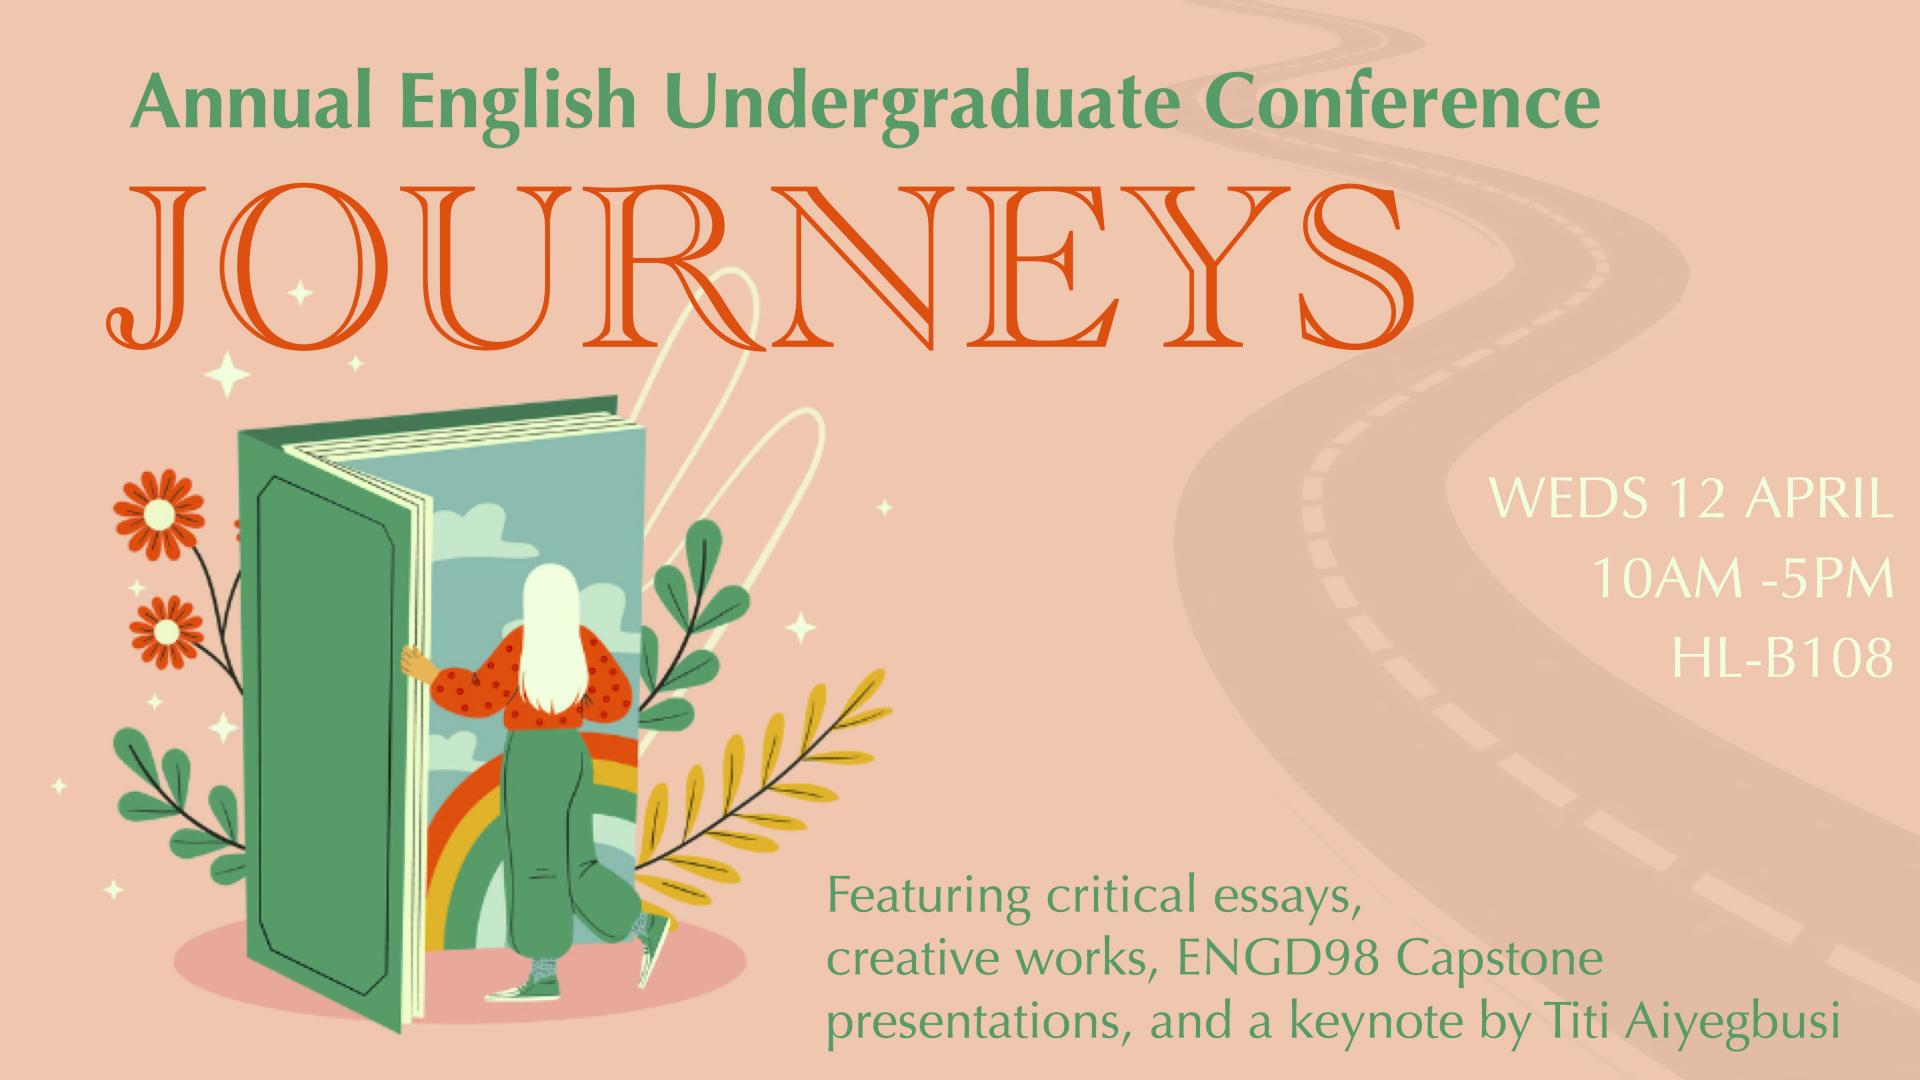 "Journeys" conference poster, with a winding road and woman walking through a book/door. Info in text.